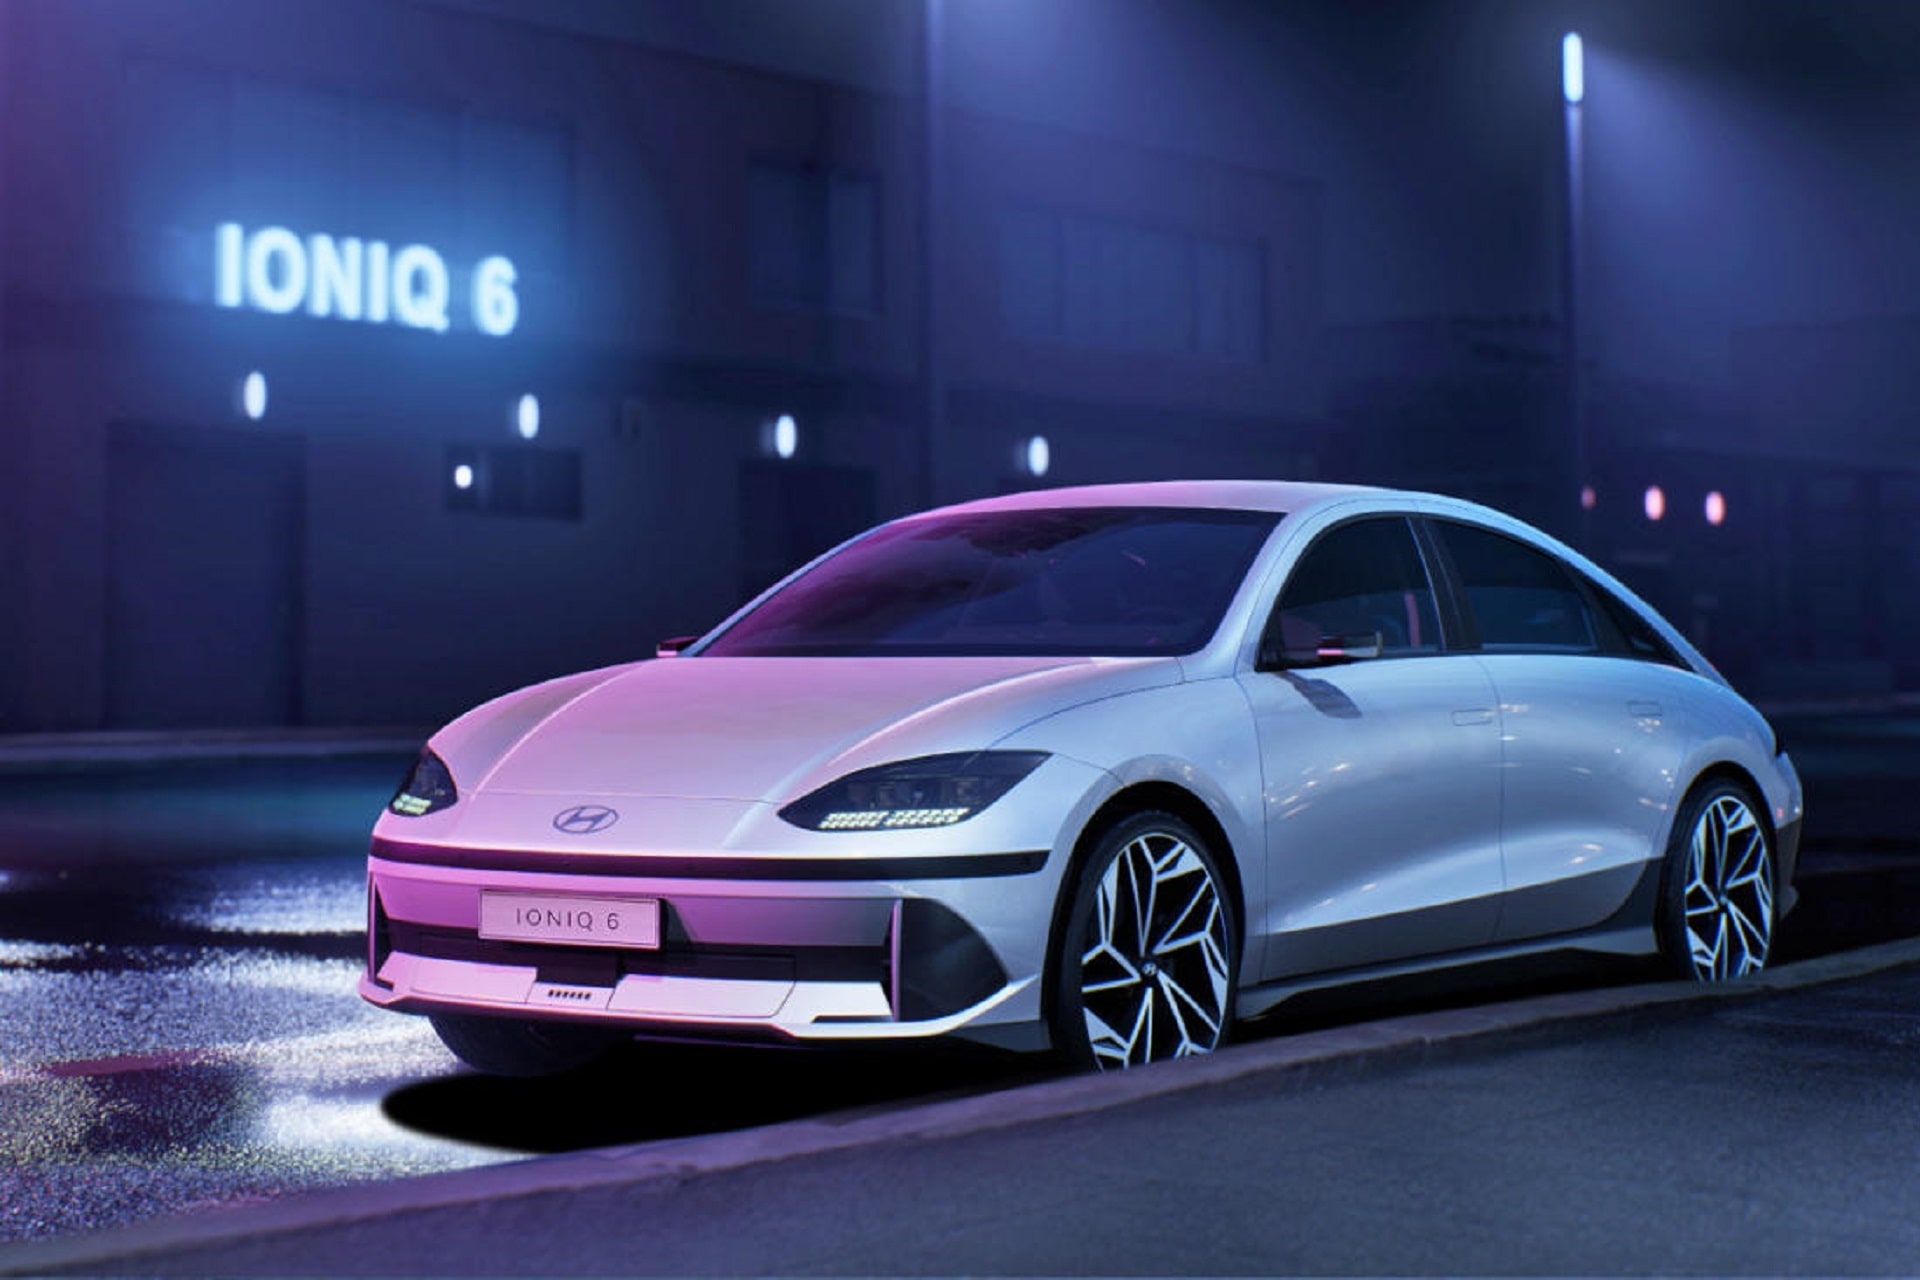 Hyundai Ioniq 6 Is Launched, To Rival Tesla Model3